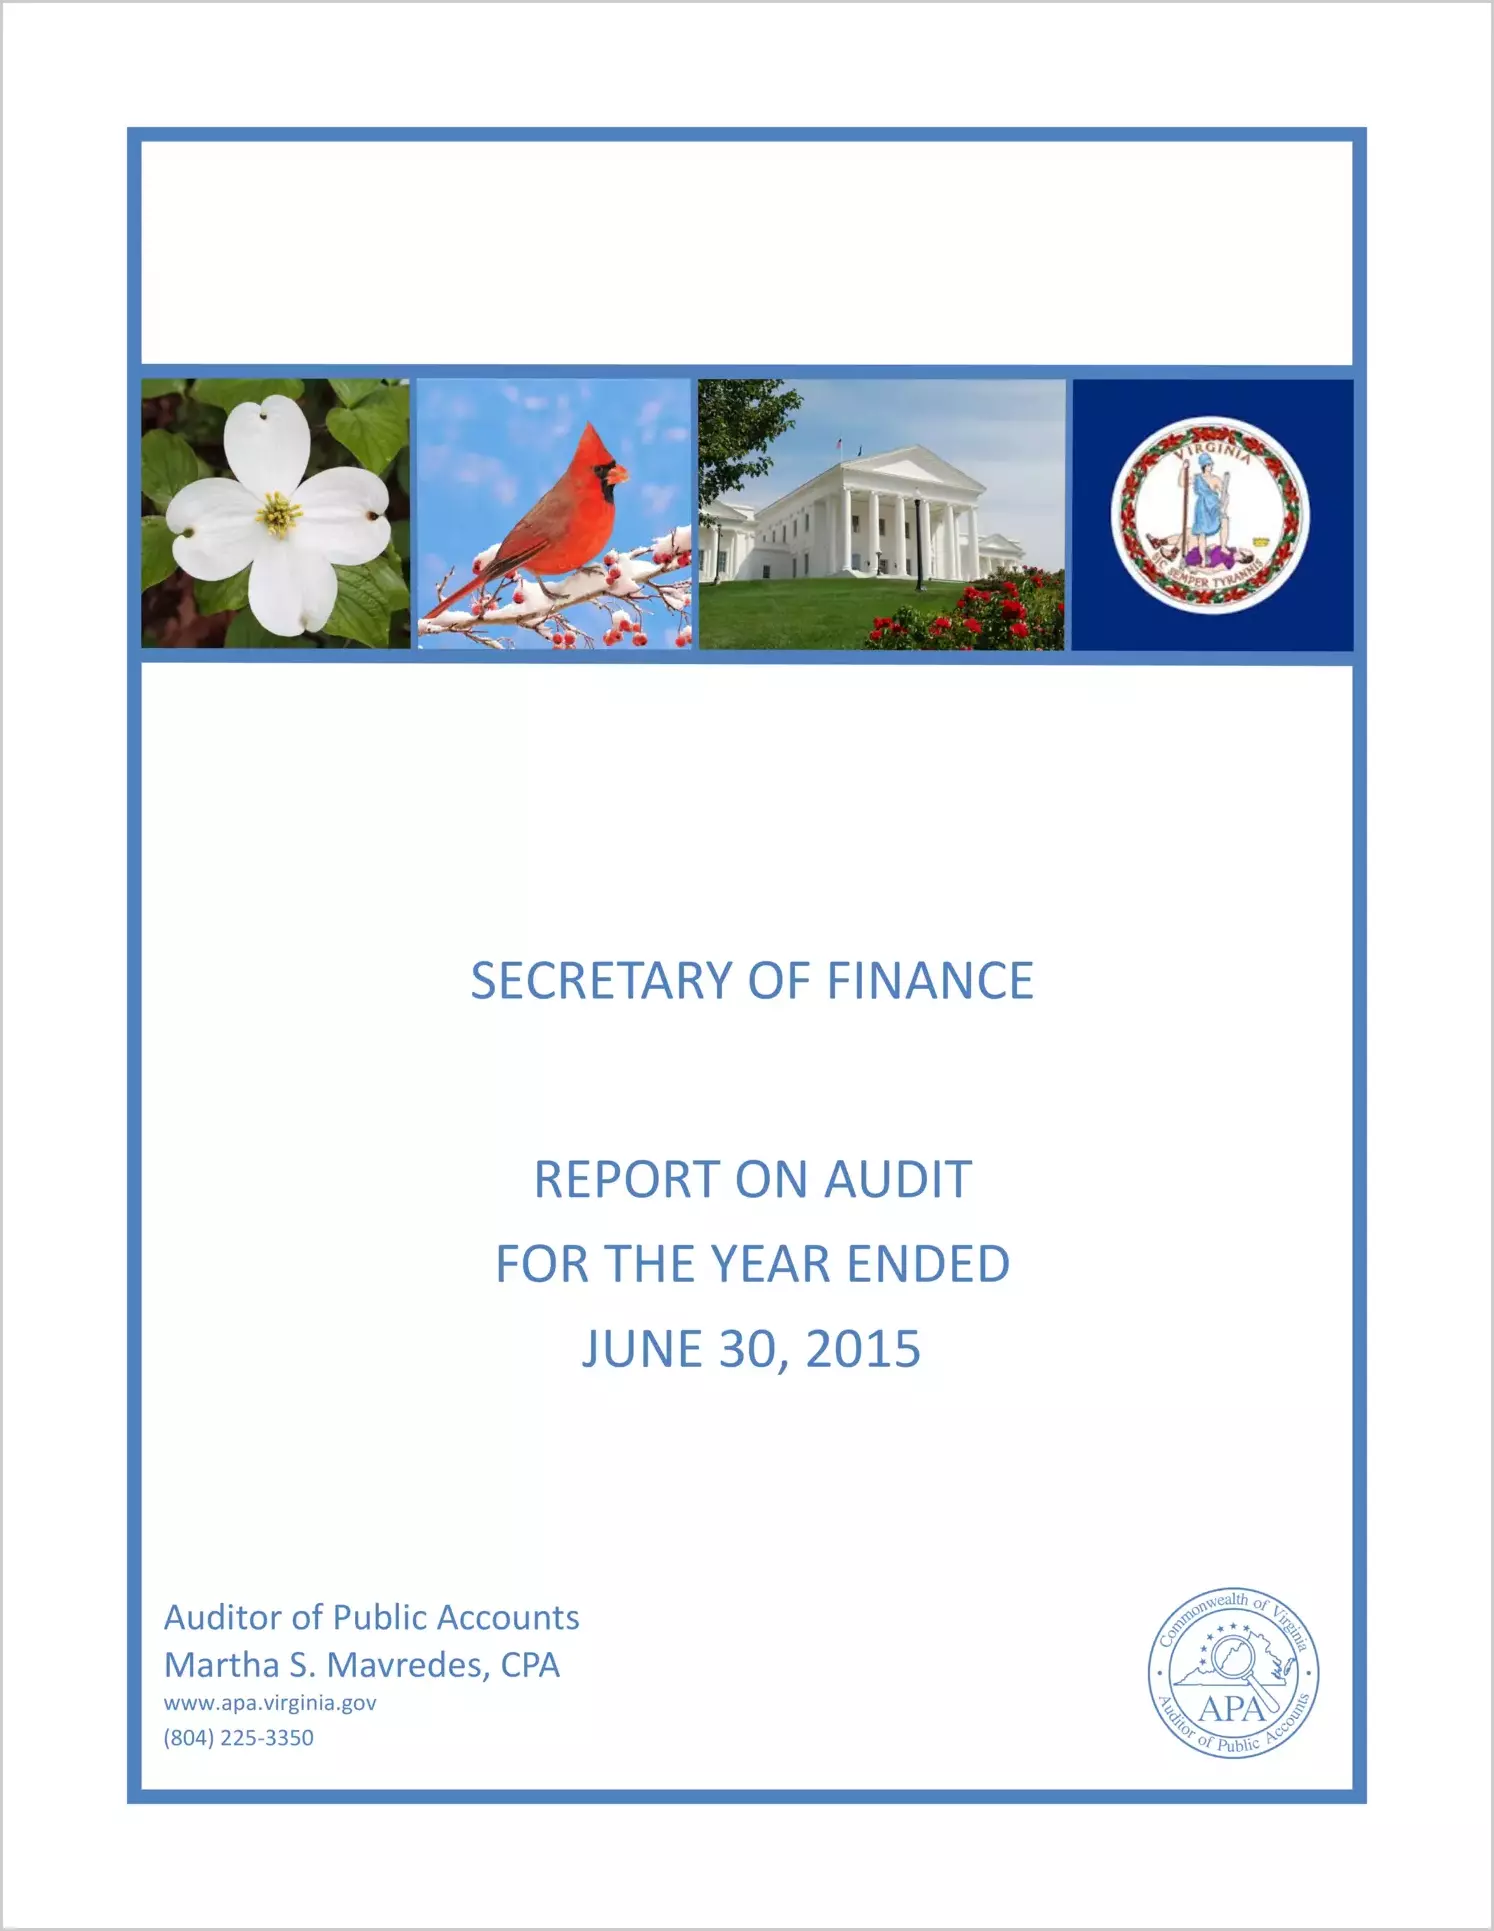 Secretary of Finance report on audit for the year ended June 30, 2015